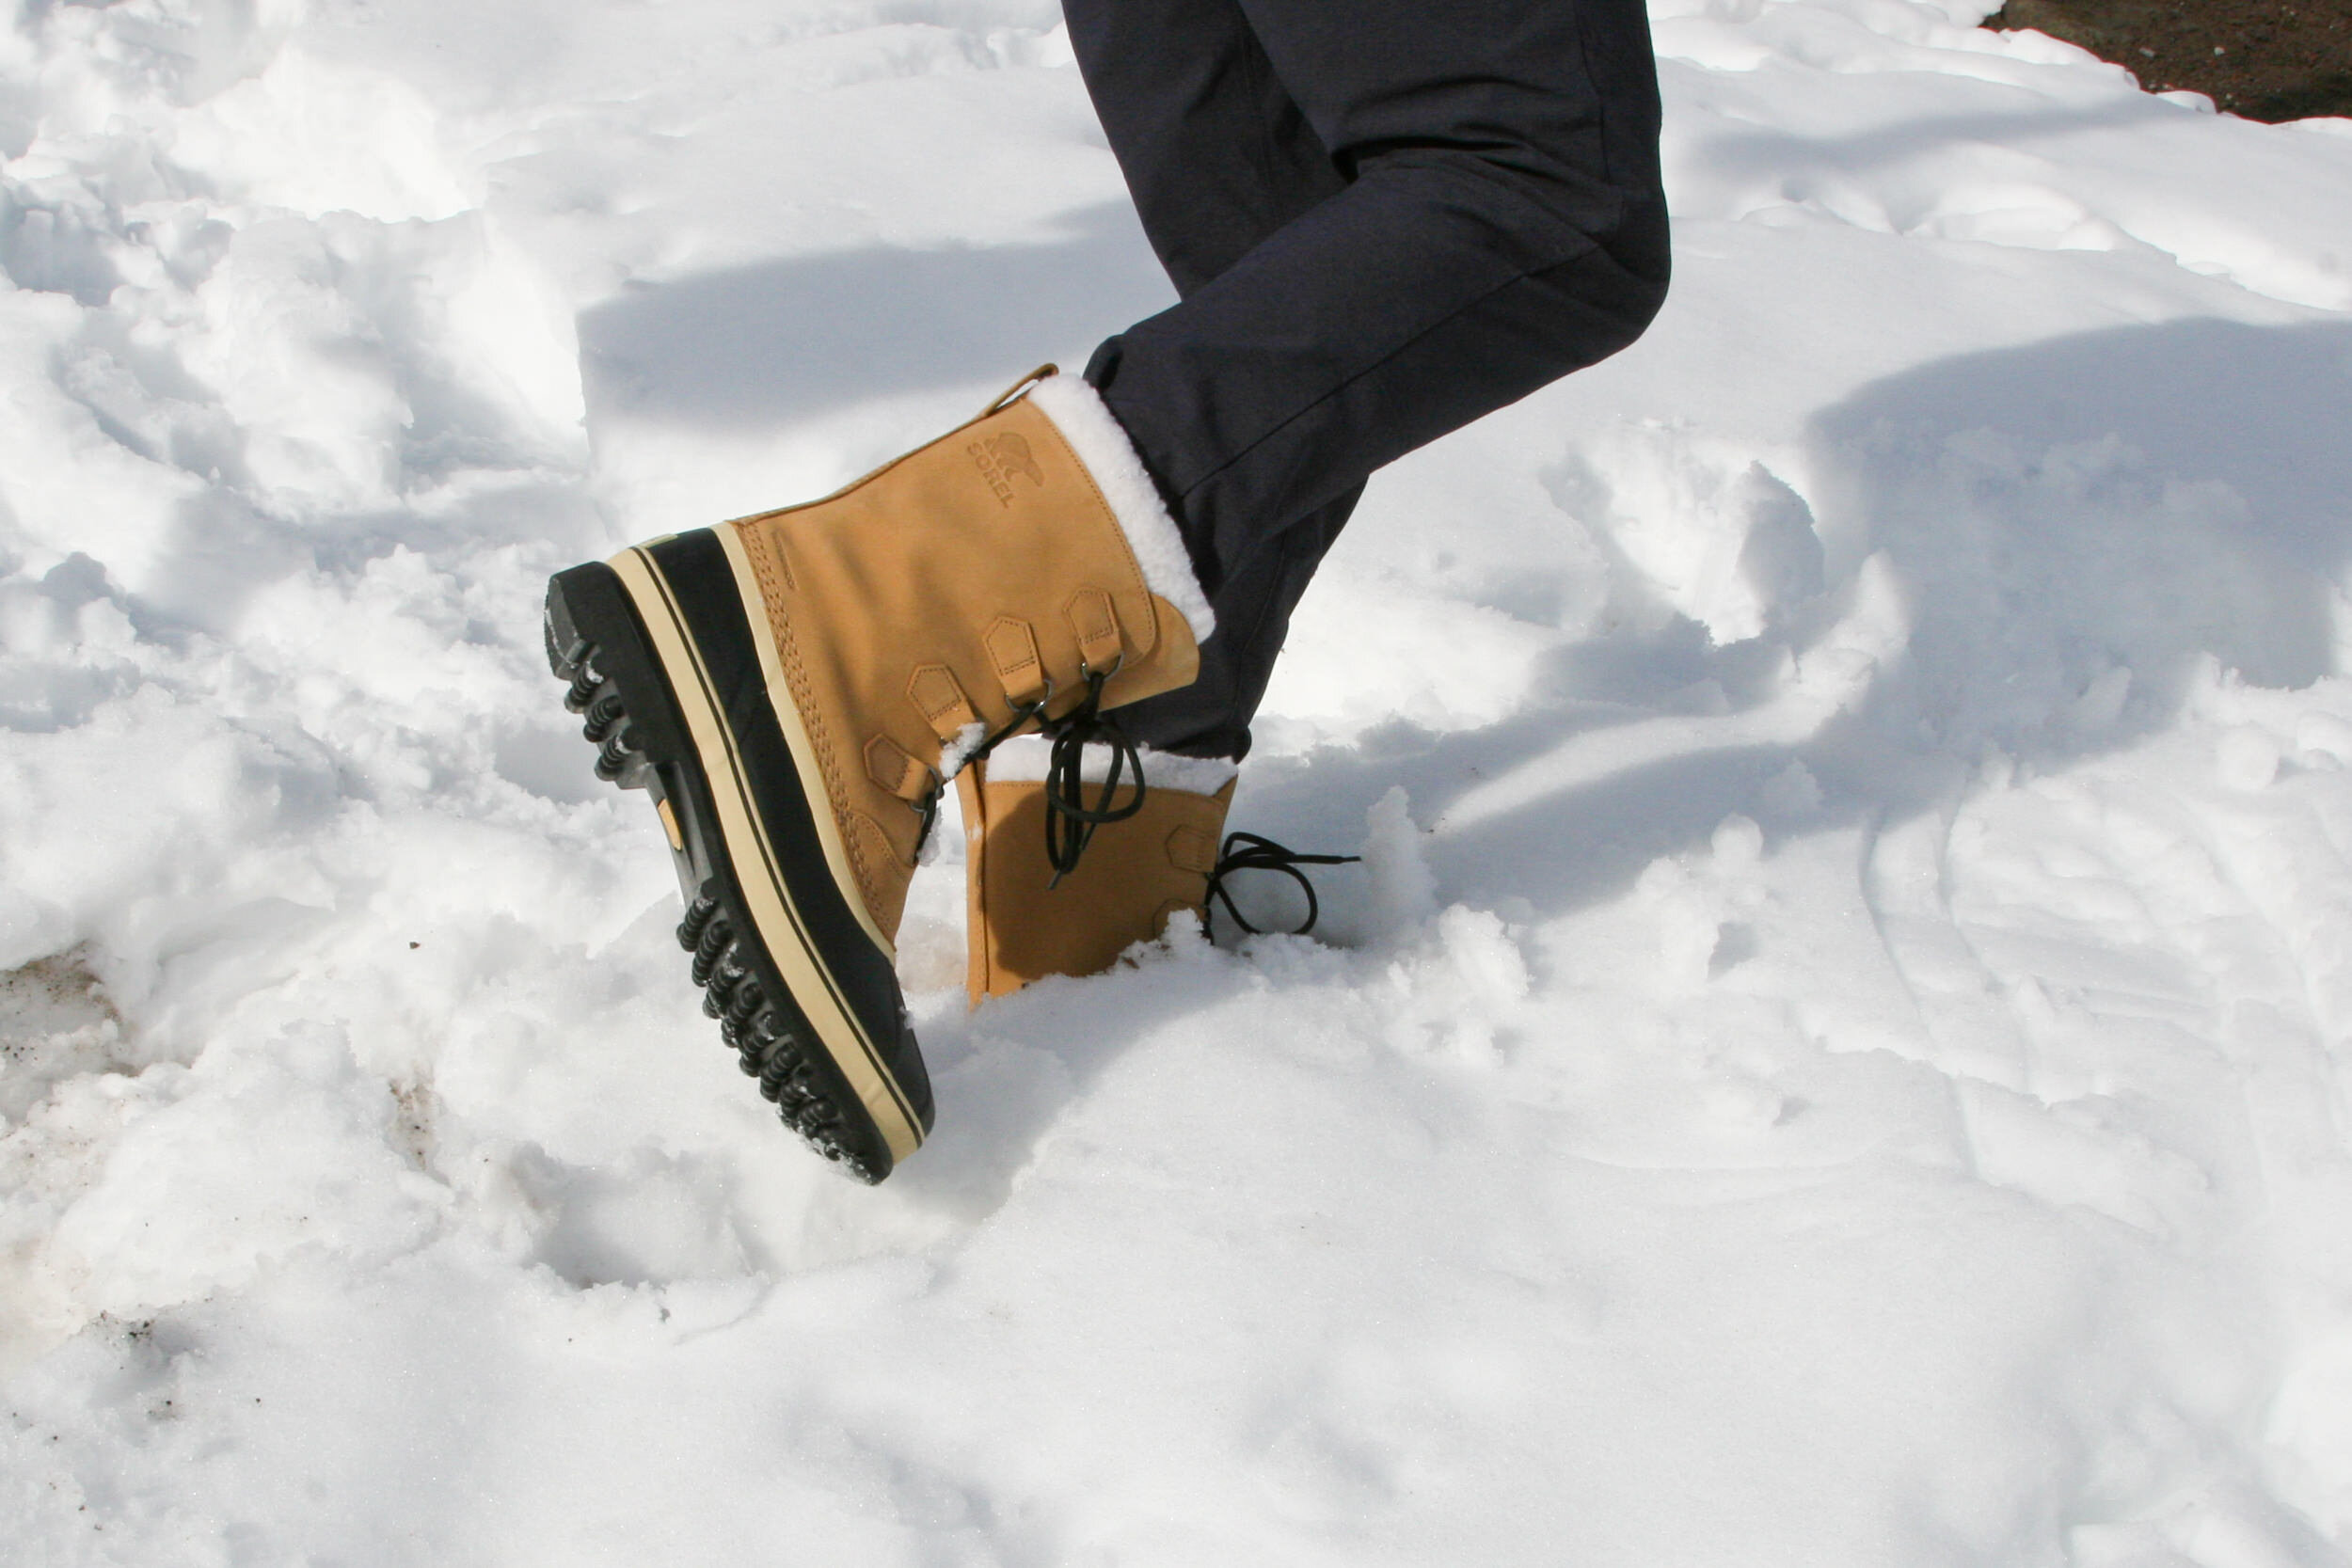 The Sorel Caribou have a tall cuff to keep snow out when walking in deep drifts